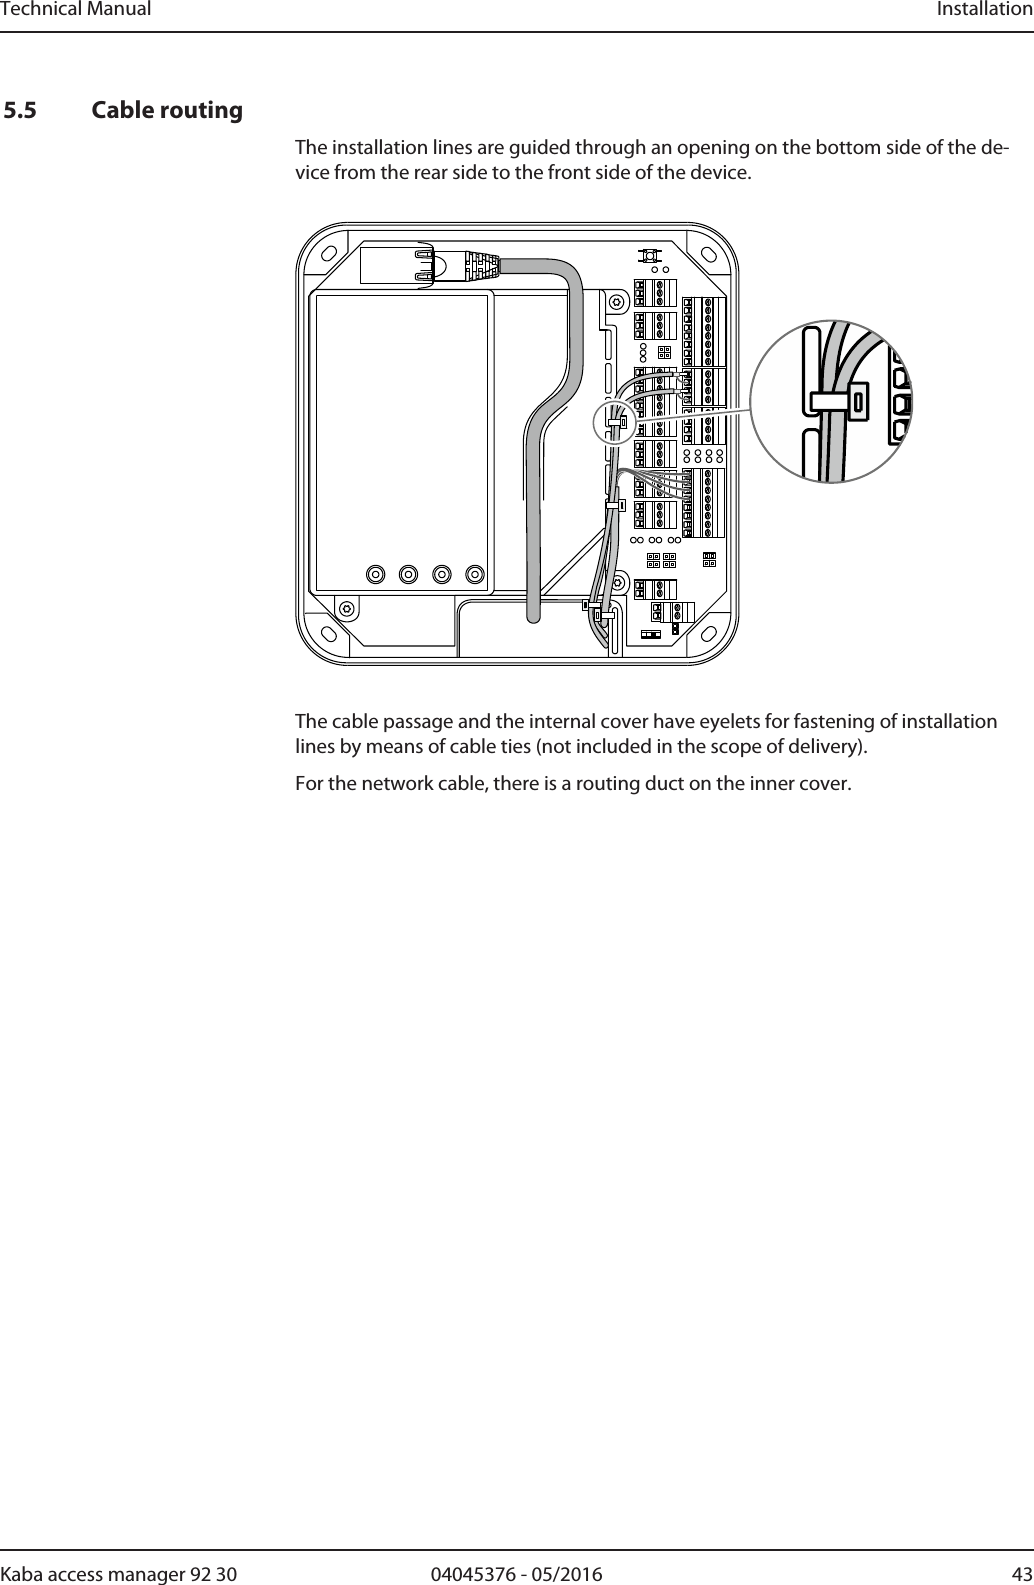 Technical Manual Installation4304045376 - 05/2016Kaba access manager 92 305.5 Cable routingThe installation lines are guided through an opening on the bottom side of the de-vice from the rear side to the front side of the device.The cable passage and the internal cover have eyelets for fastening of installationlines by means of cable ties (not included in the scope of delivery).For the network cable, there is a routing duct on the inner cover.